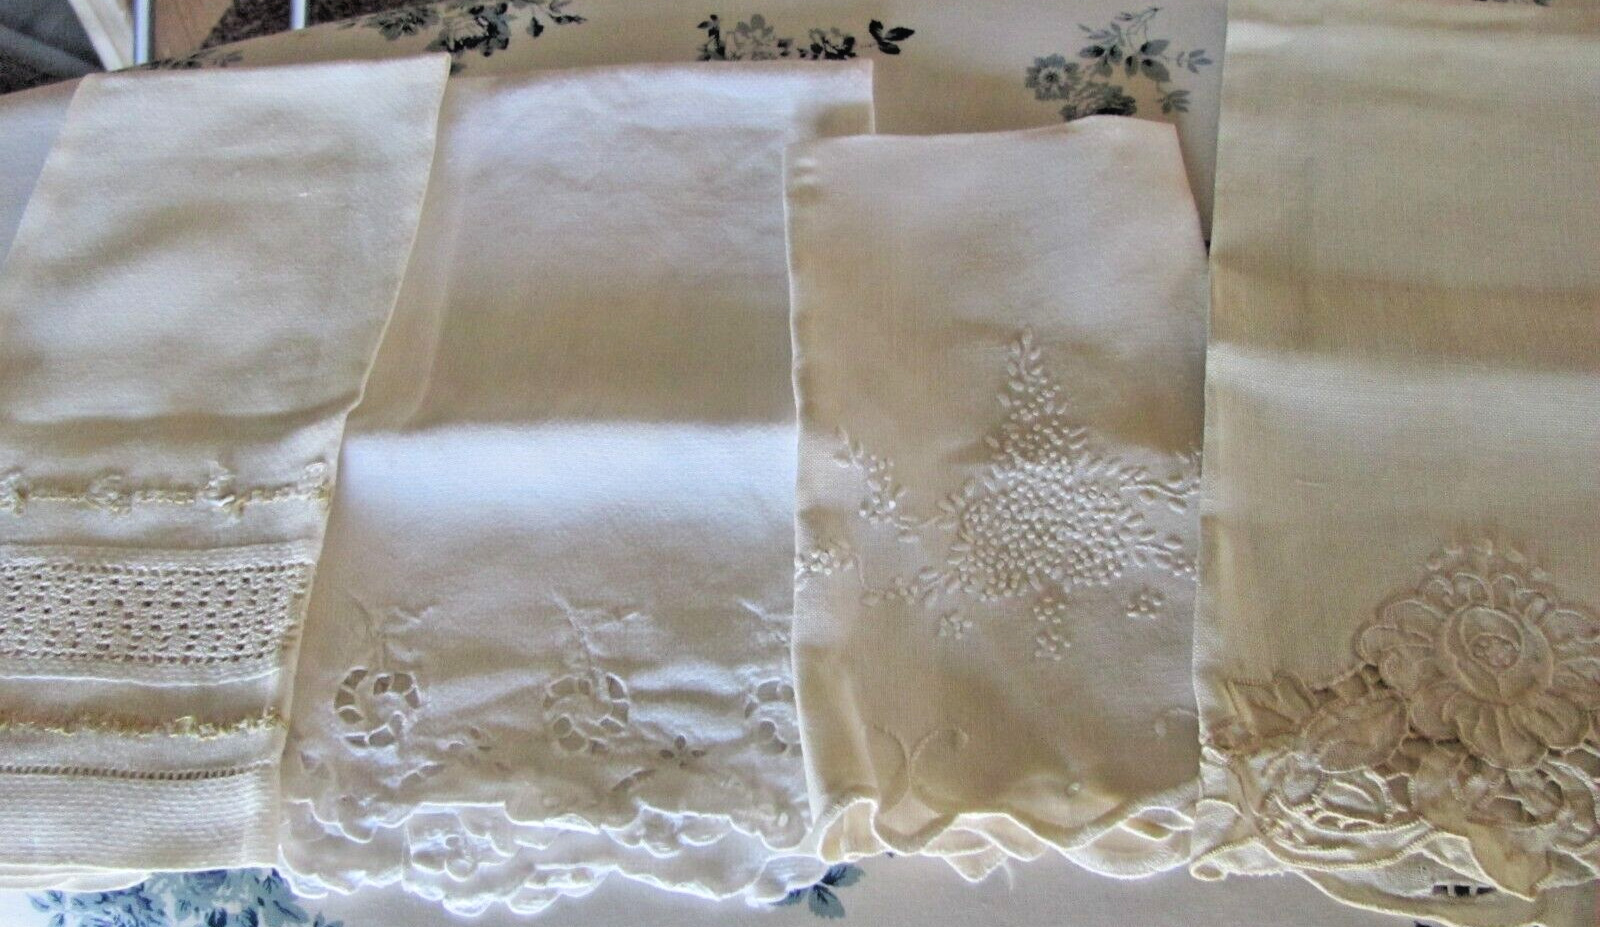 Lot of 4 Vintage Guest Hand Towels - Embroidery, Cutwork, Huck Linen